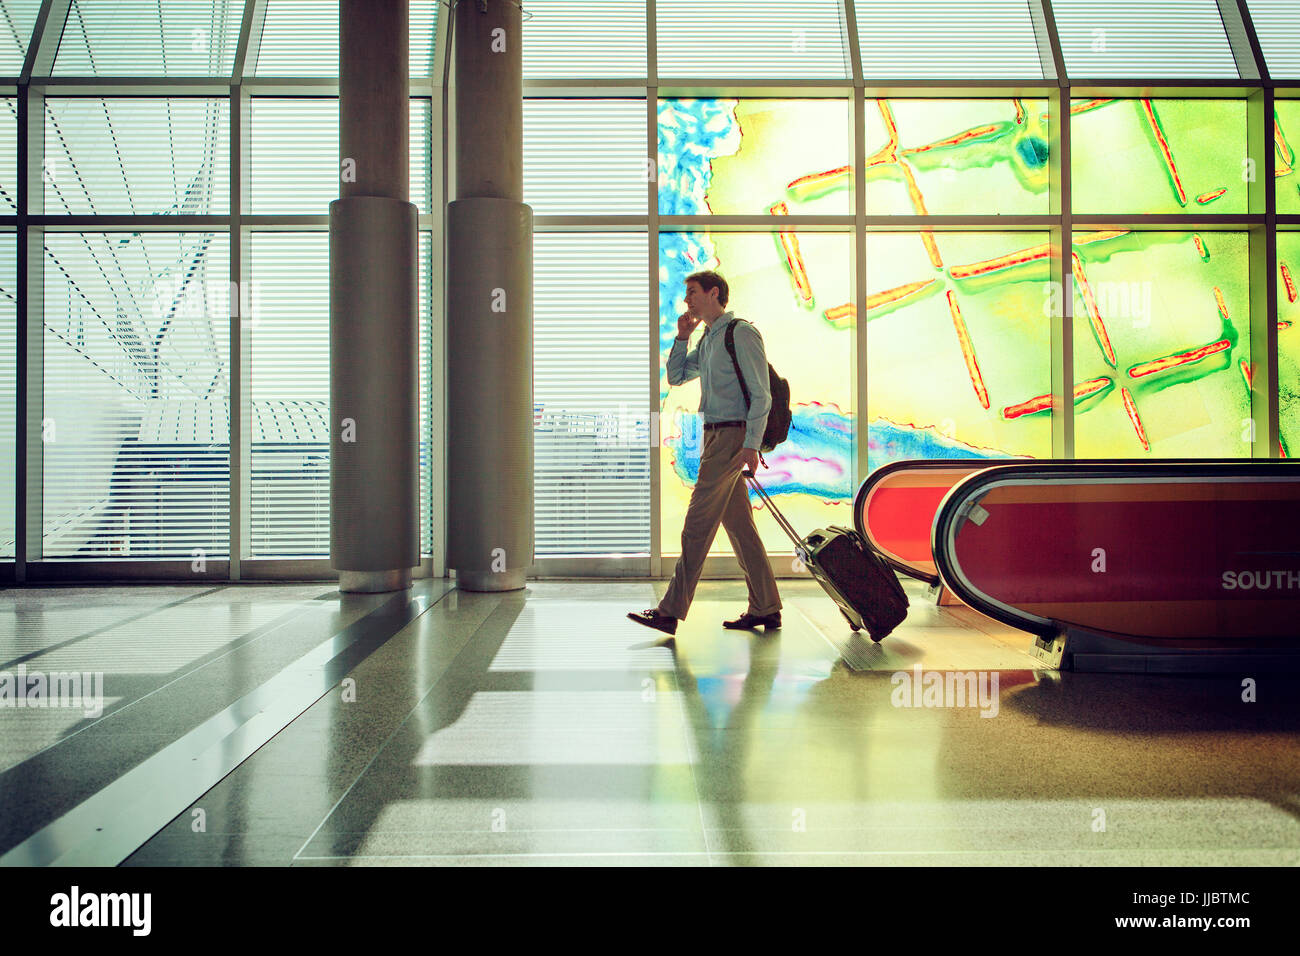 Man talking on cellphone and pulling a bag in an airport. Stock Photo